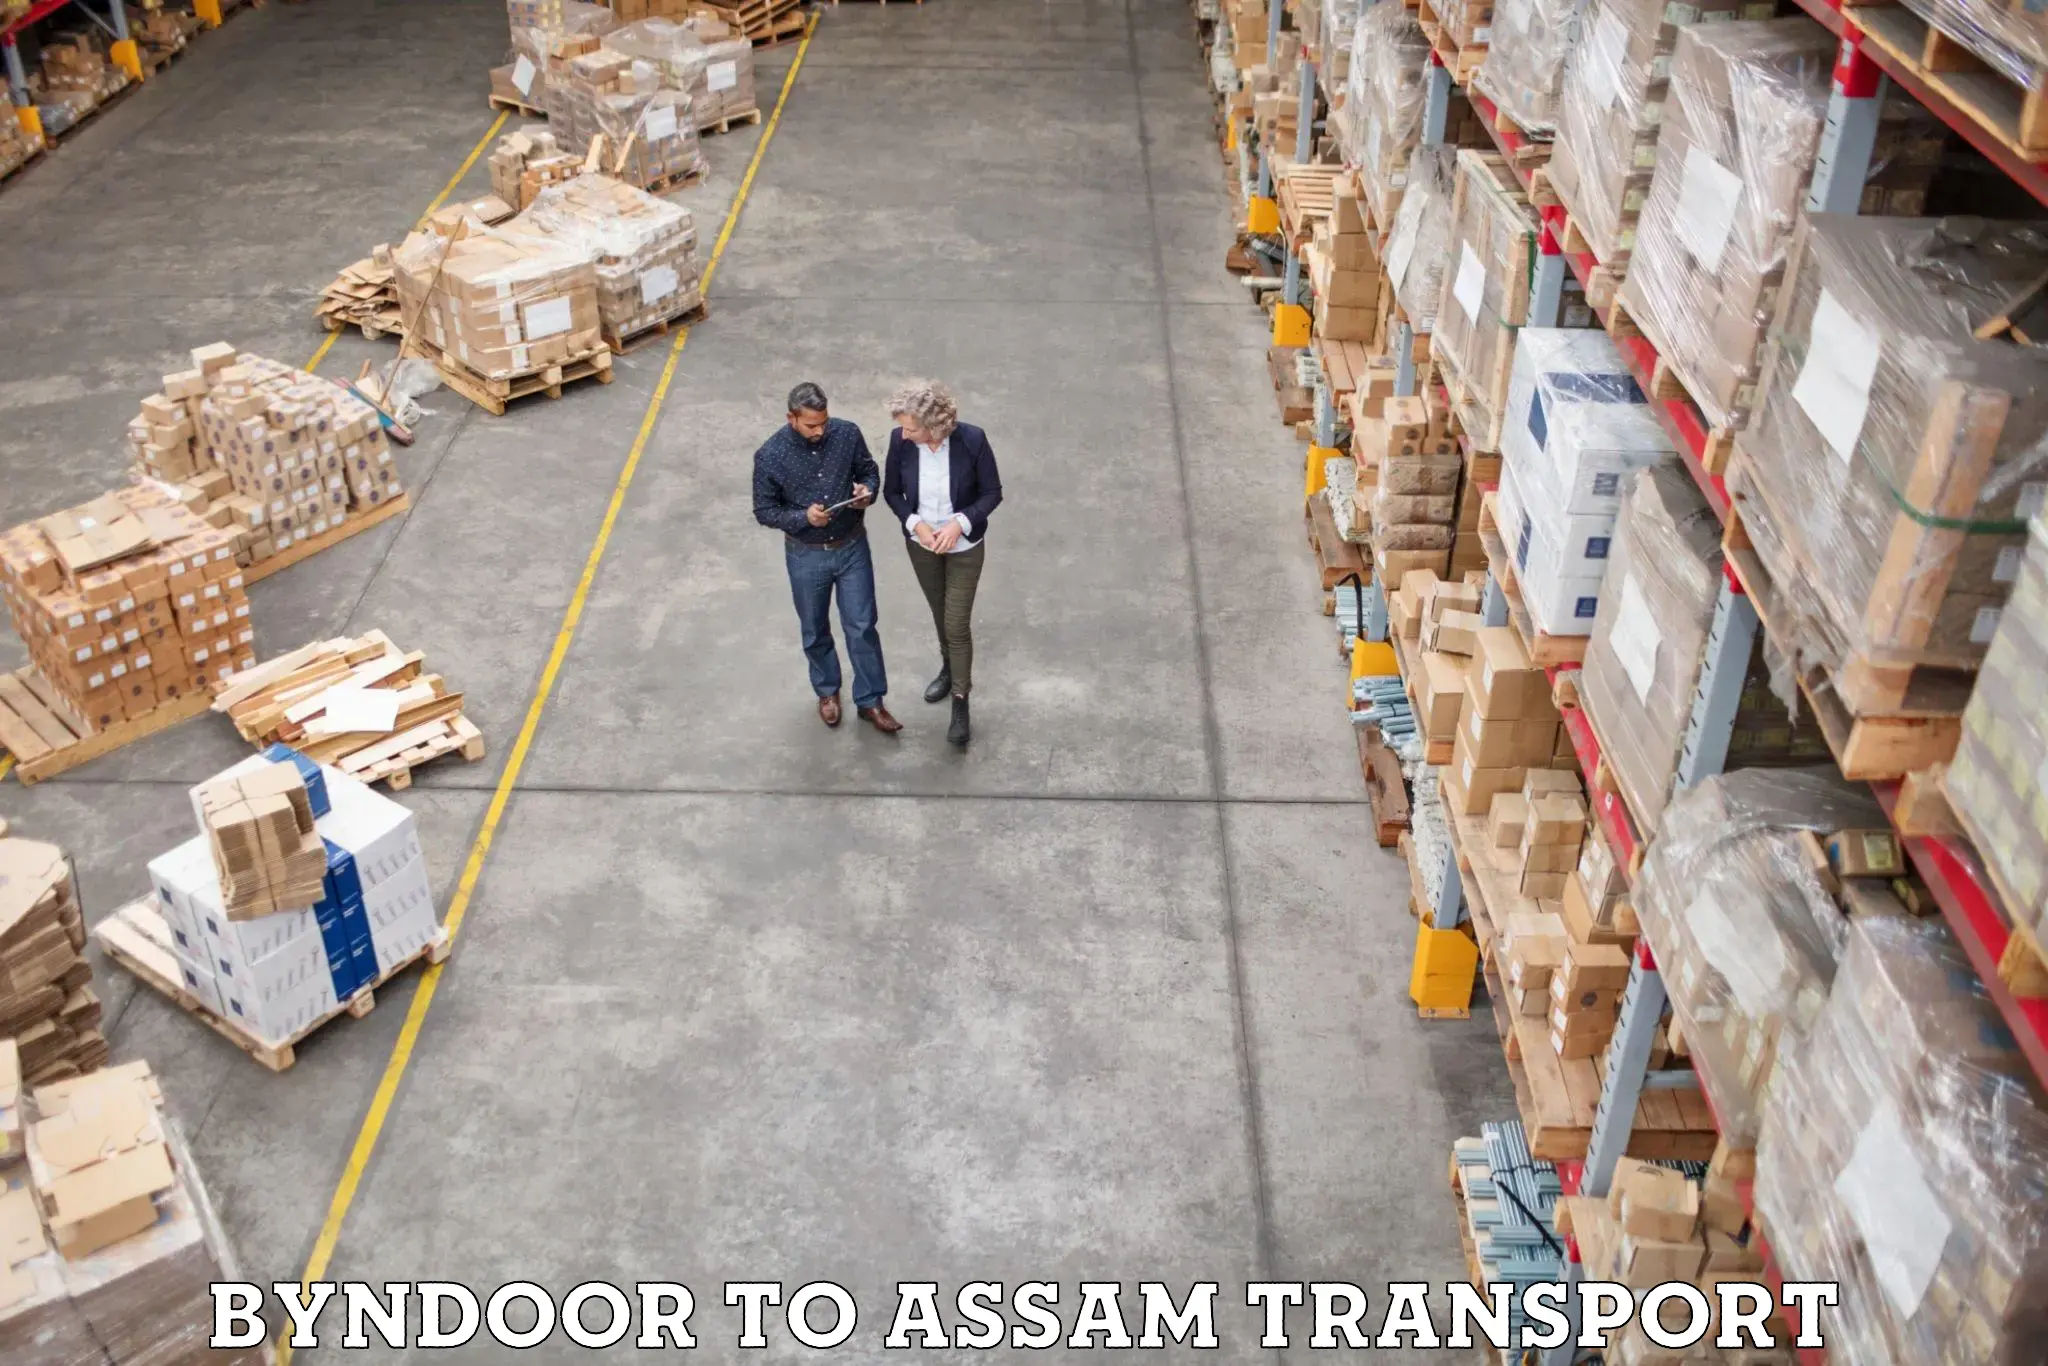 Daily parcel service transport Byndoor to Lala Assam